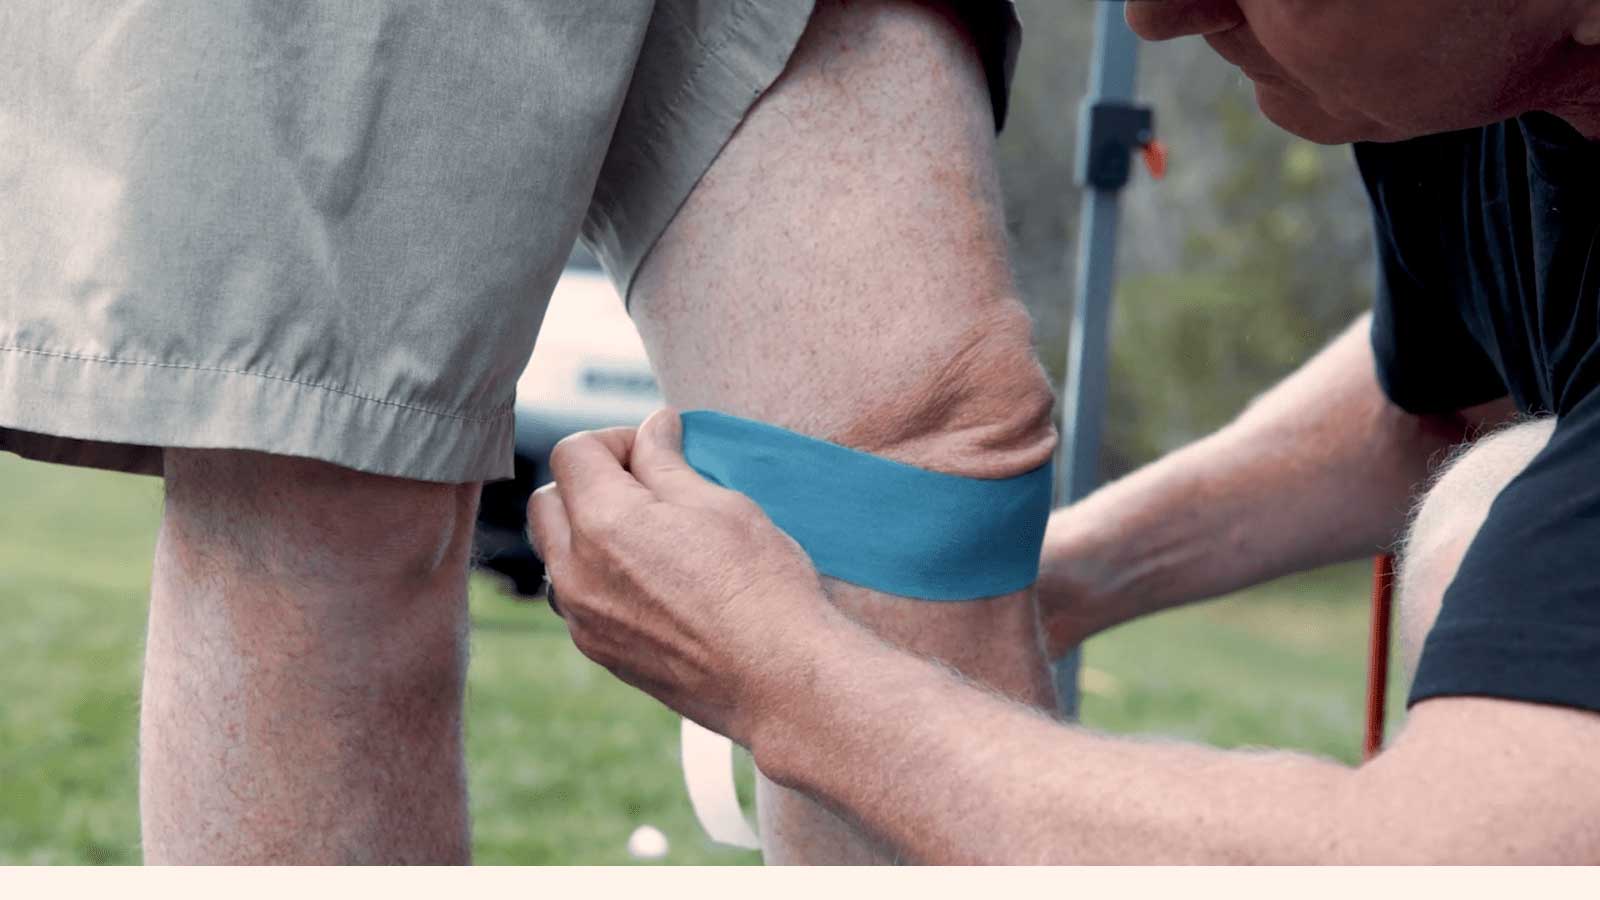 XPRO-CBD-Sports-Tape-for-Knee-Pain-by-Binger-Labs-Los-Angeles-Based-Broad-Spectrum-CBD-Brand